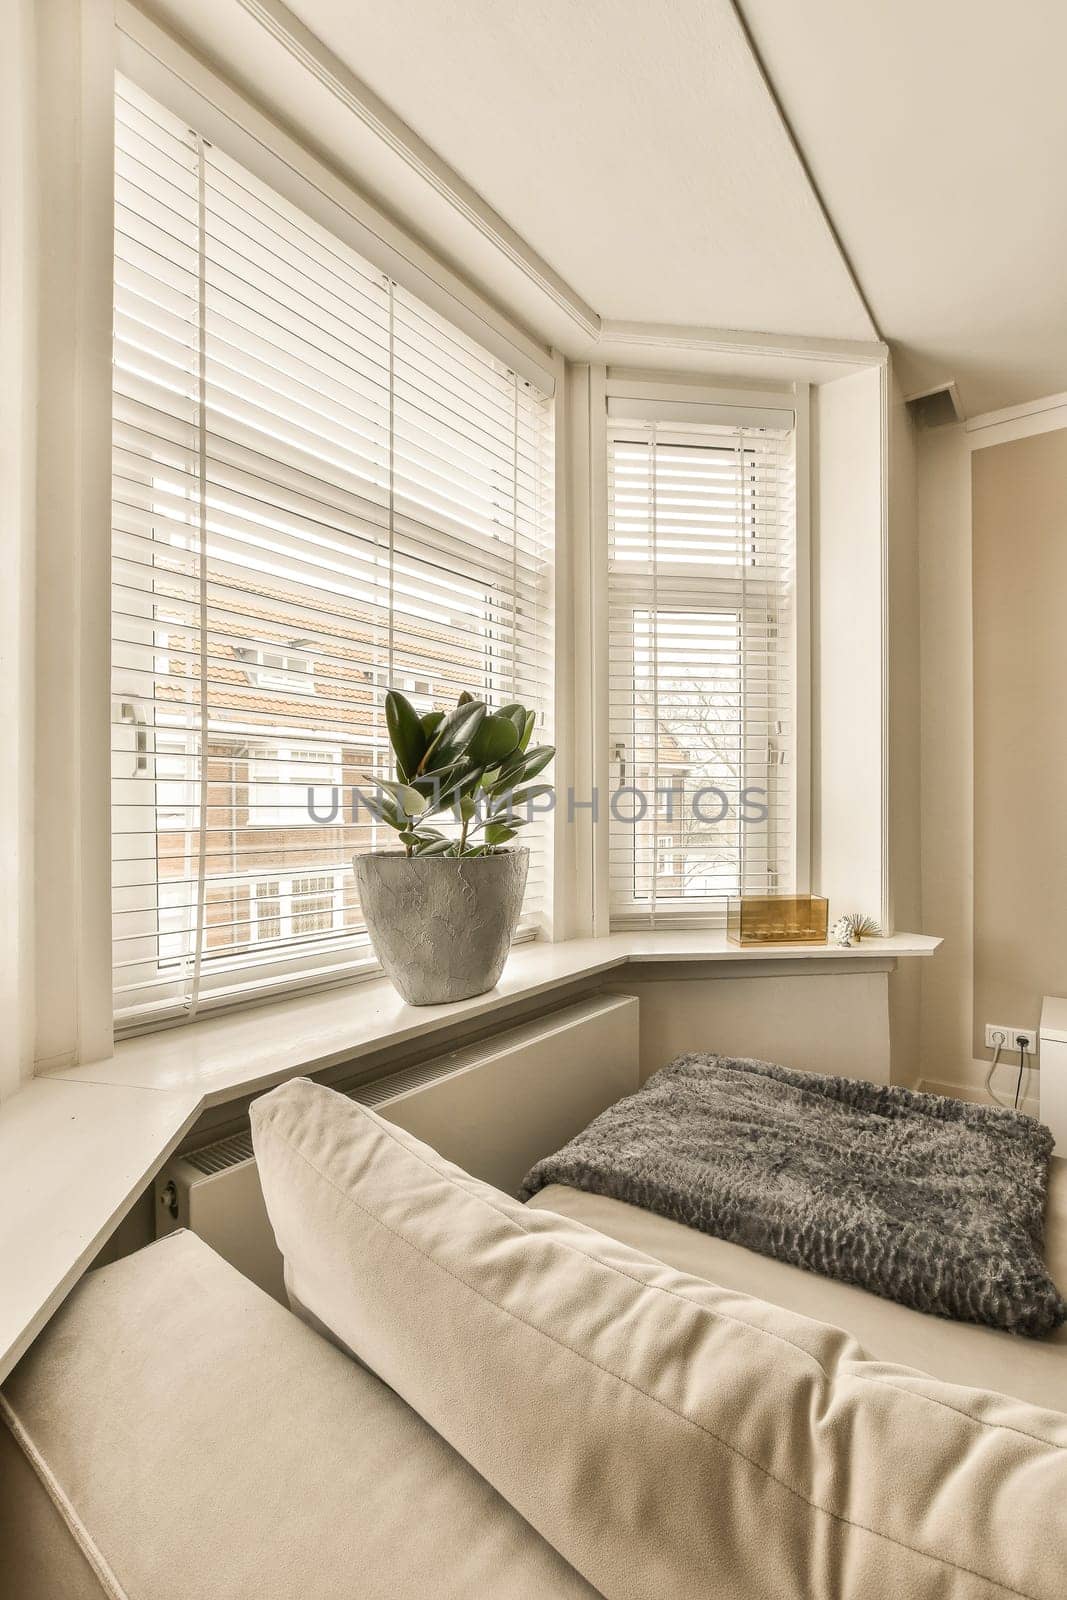 a bed in a room with blinds on the window and a plant in a vase sitting on top of it